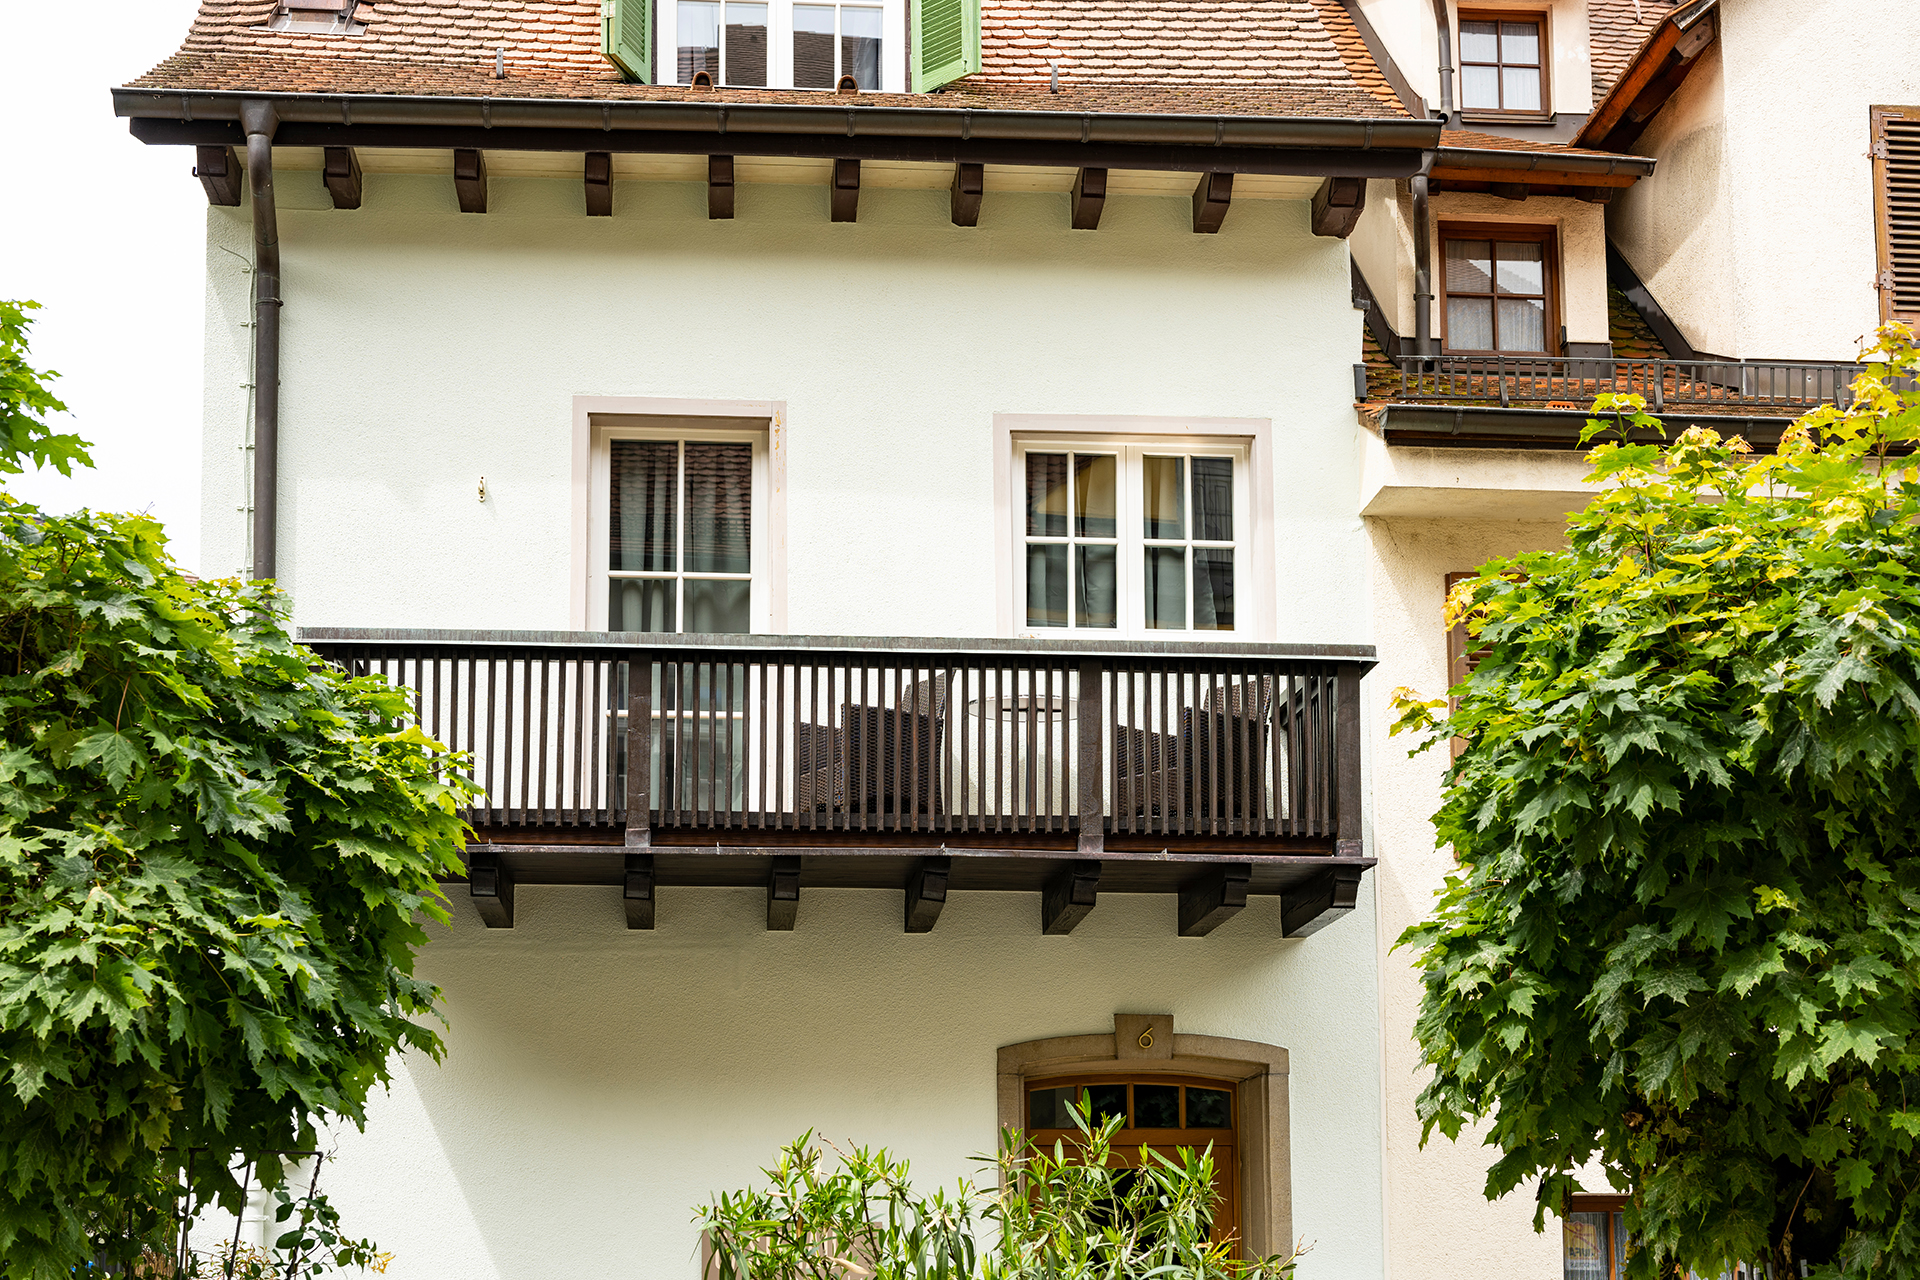 Holiday apartments on Lake Constance: Guest House "Am Schlossplatz", Room #2 - Balcony